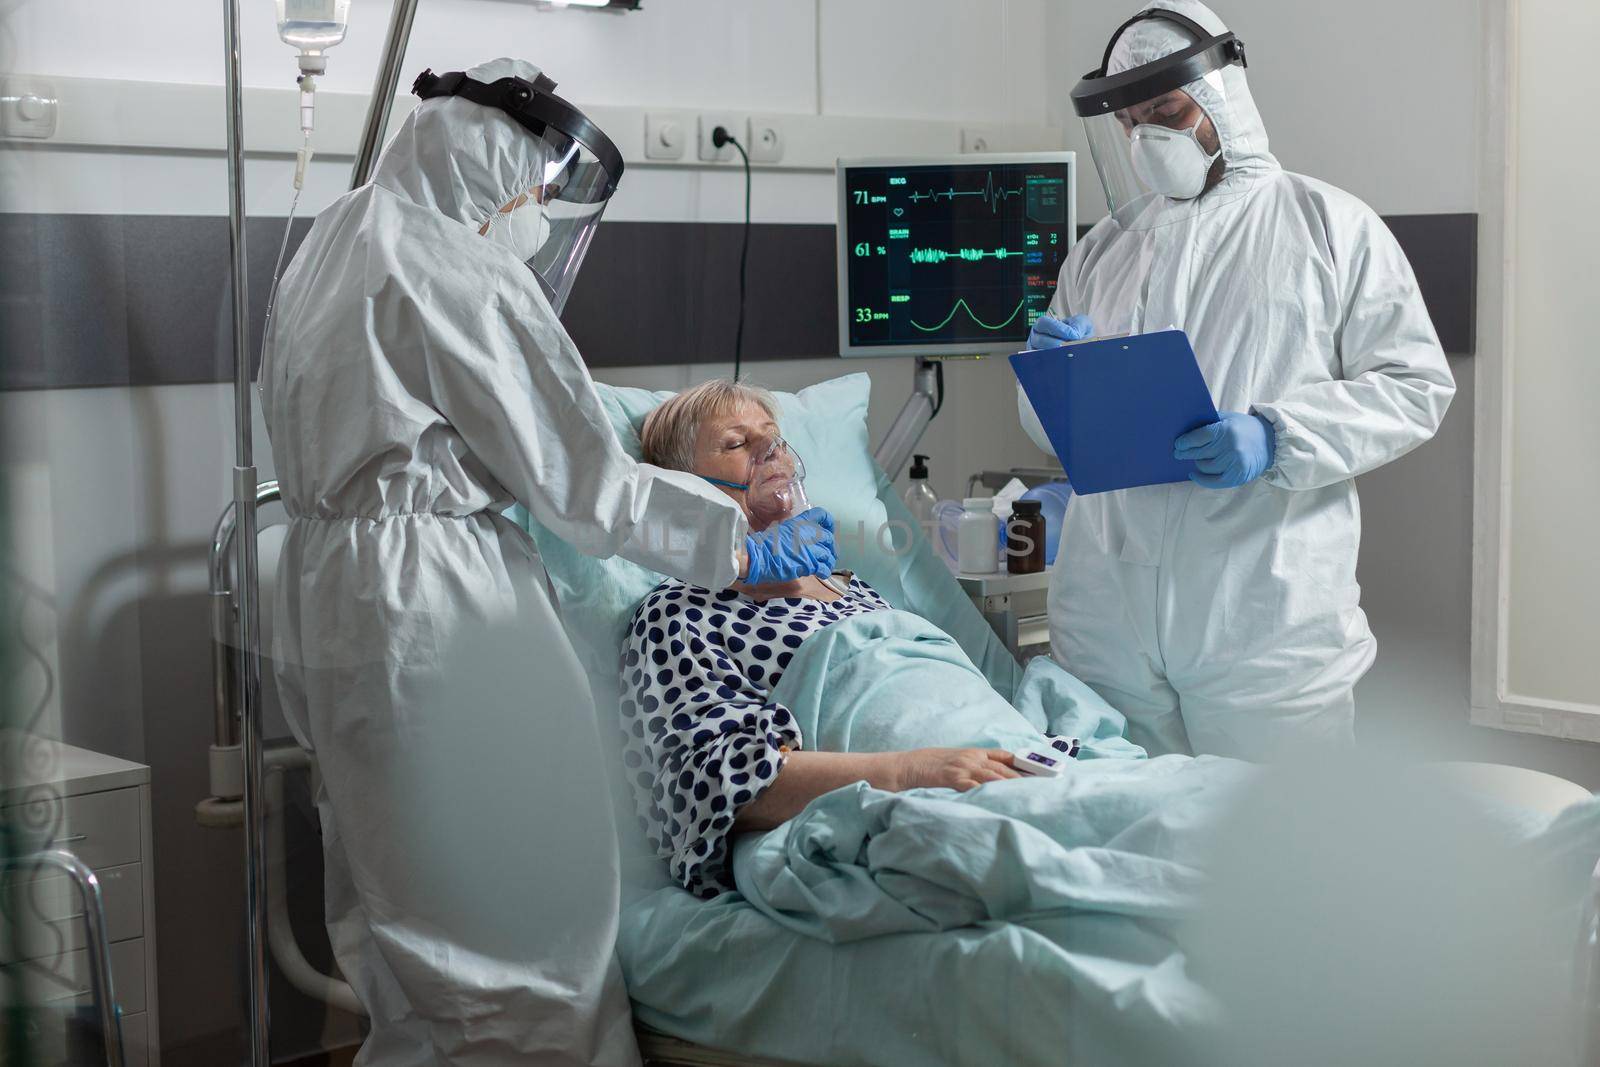 Medical staff in ppe suit helping patient breath with oxygen mask by DCStudio